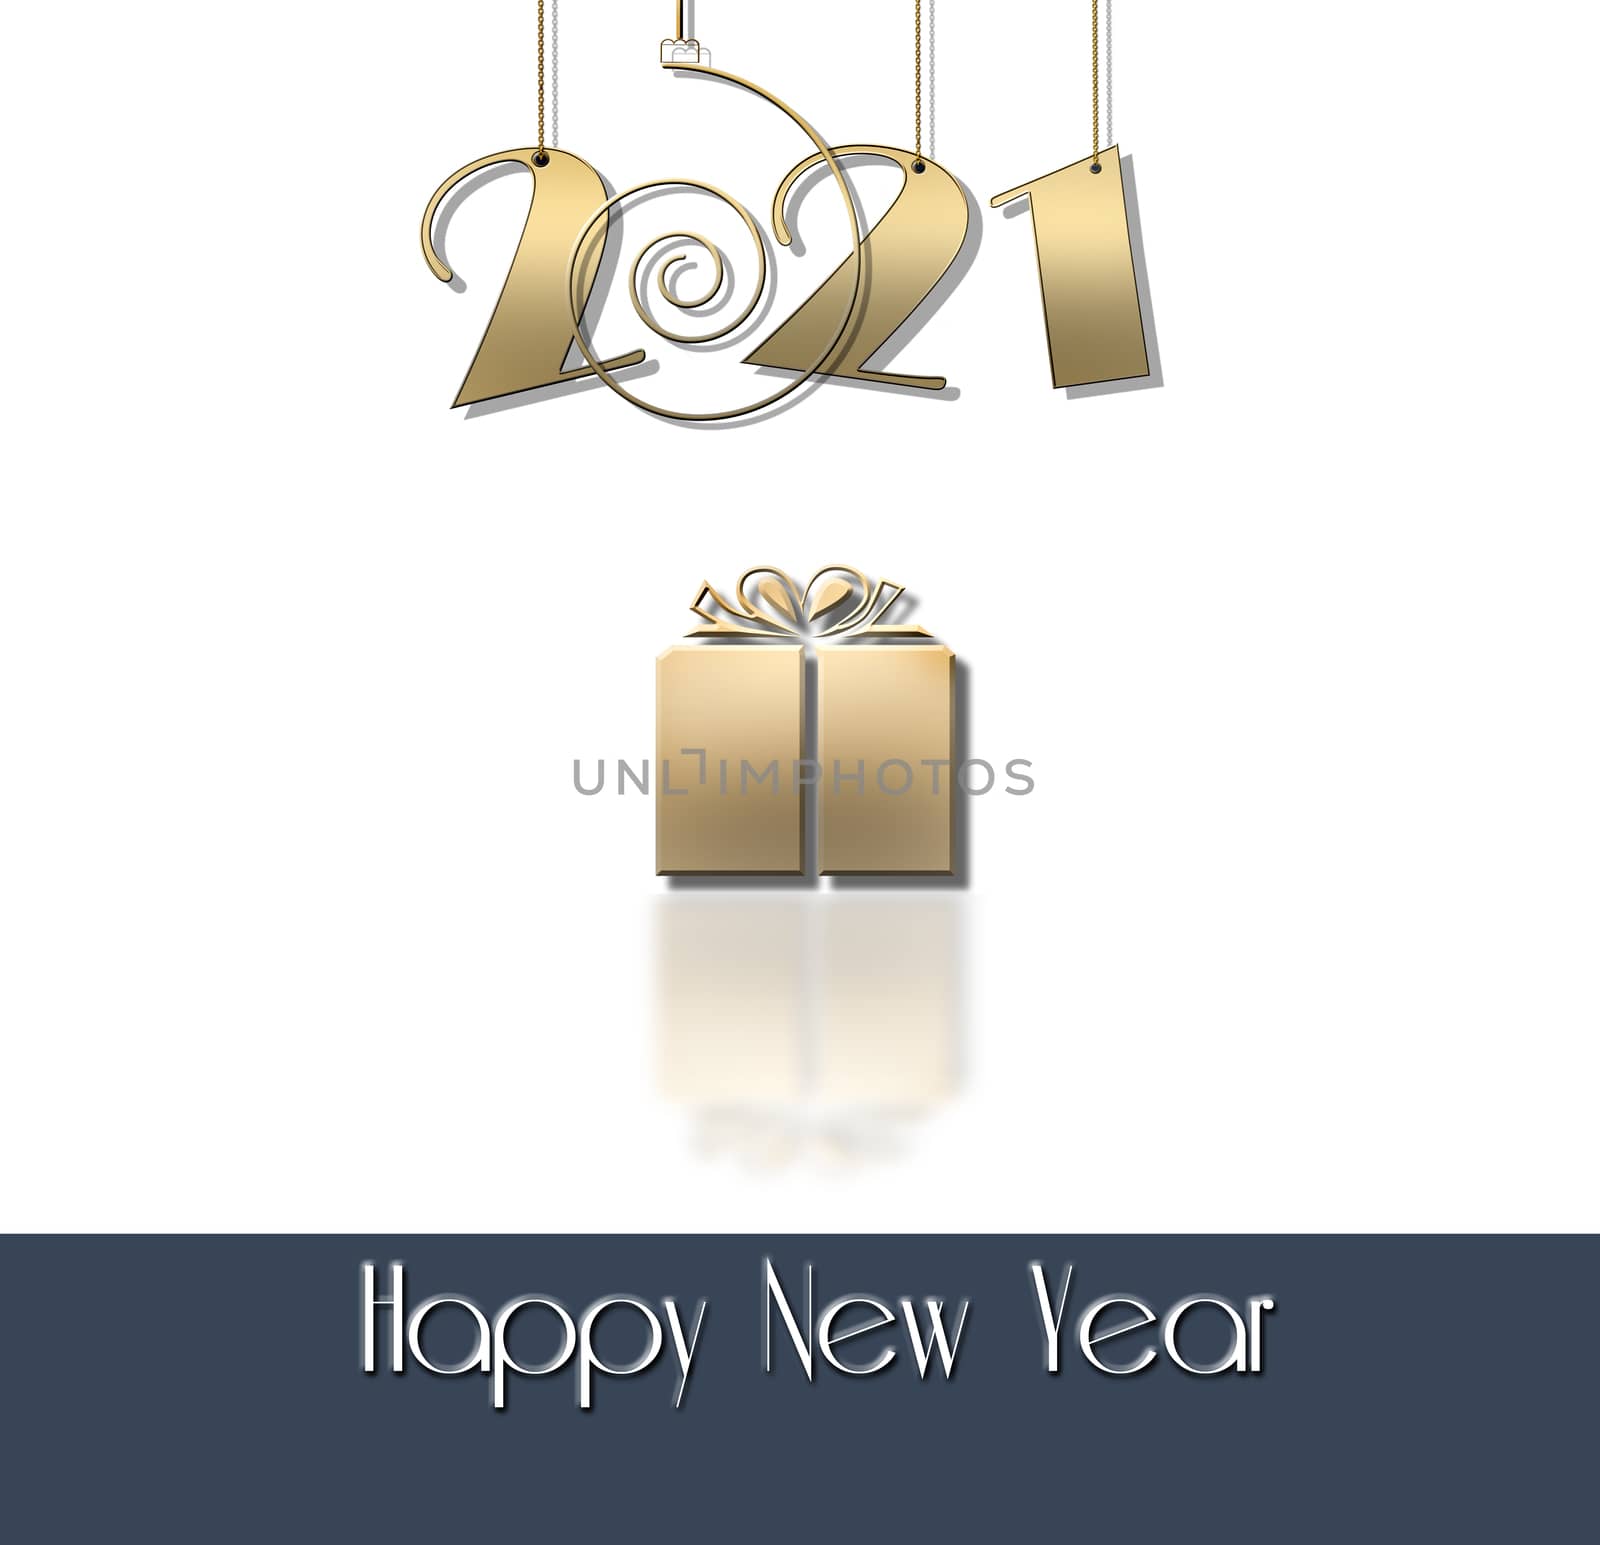 Luxury minimalist Happy New 2021 Year design with hanging gold 2021 digit, shiny gift box with reflection on white background. Text Happy New Year. Mock up, Copy space, greeting card. 3D illustration